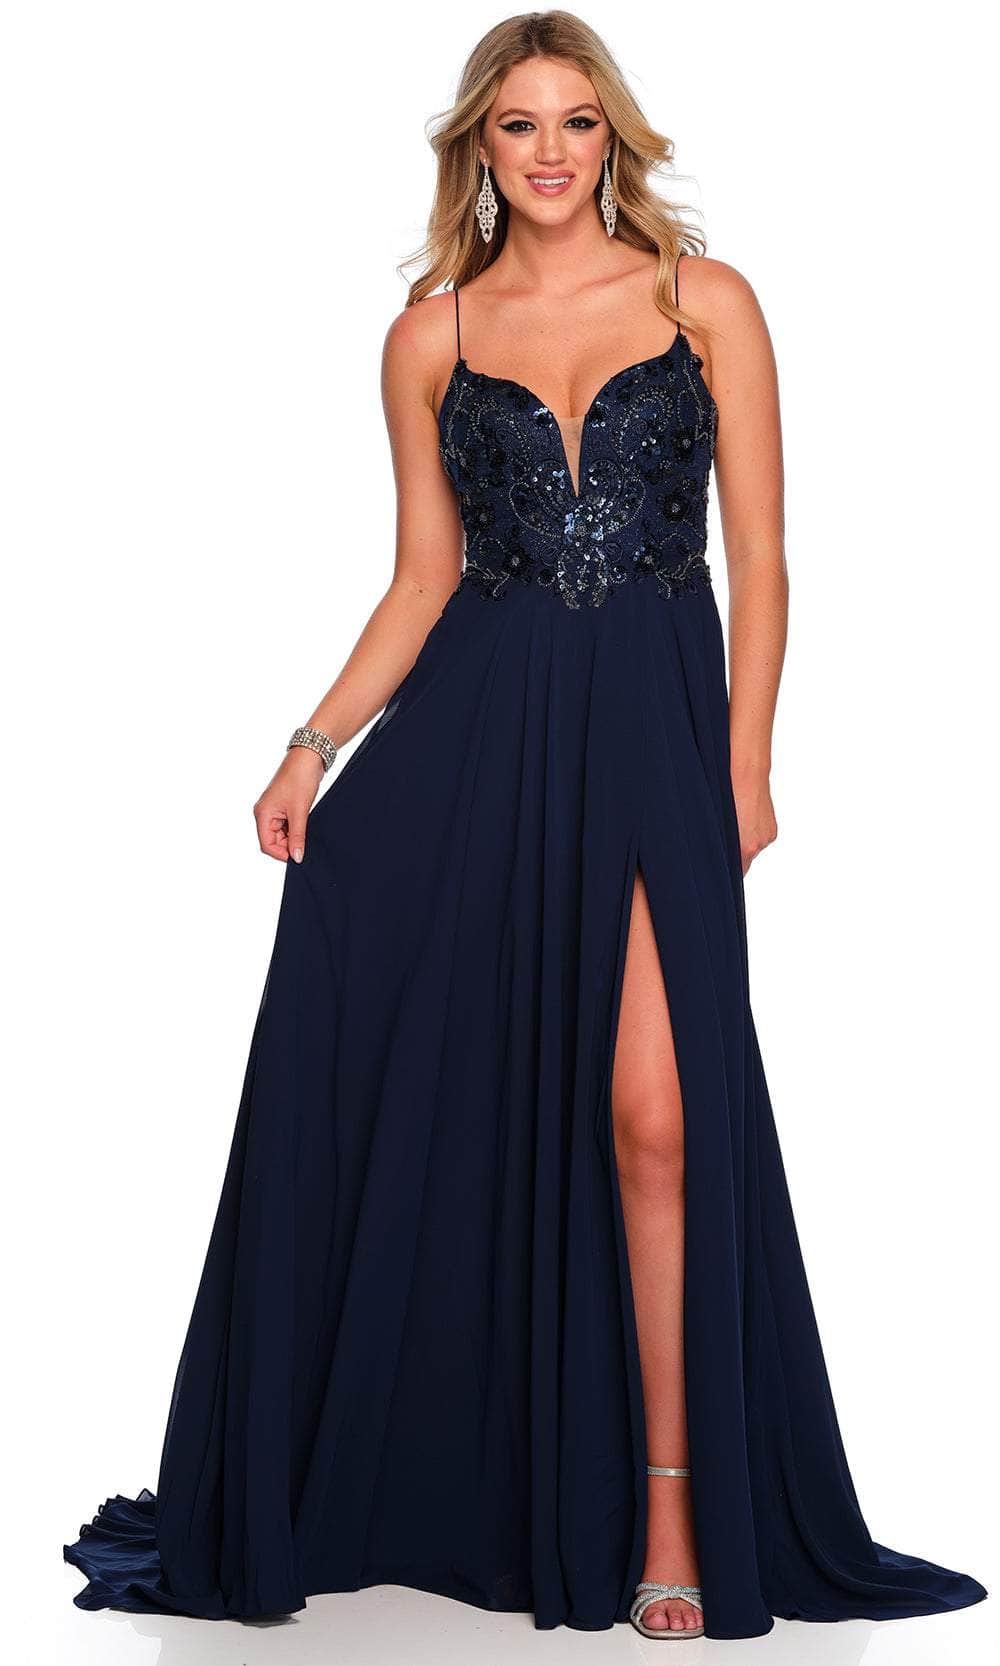 Image of Dave & Johnny 11241 - Cutout Back Flowy A-Line Prom Gown